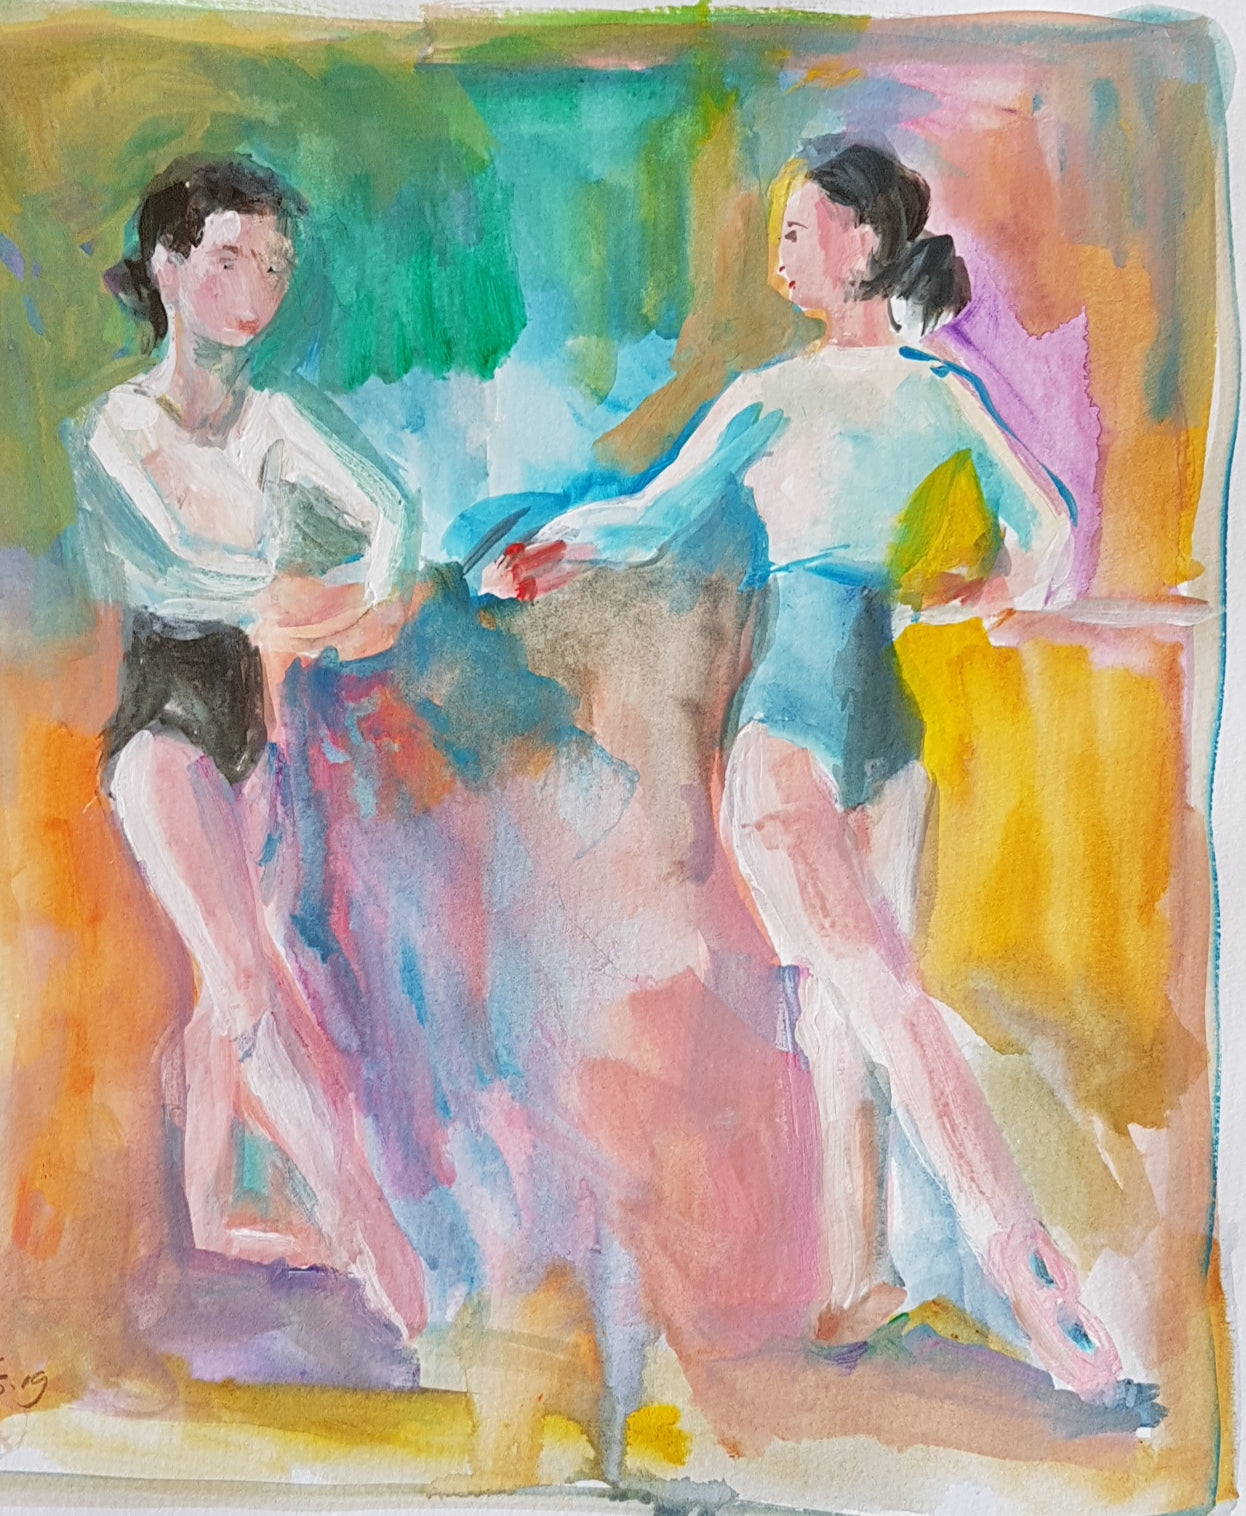 two girls facing each other, practicing ballet wearing white tops over black leotards infront of a colourful background